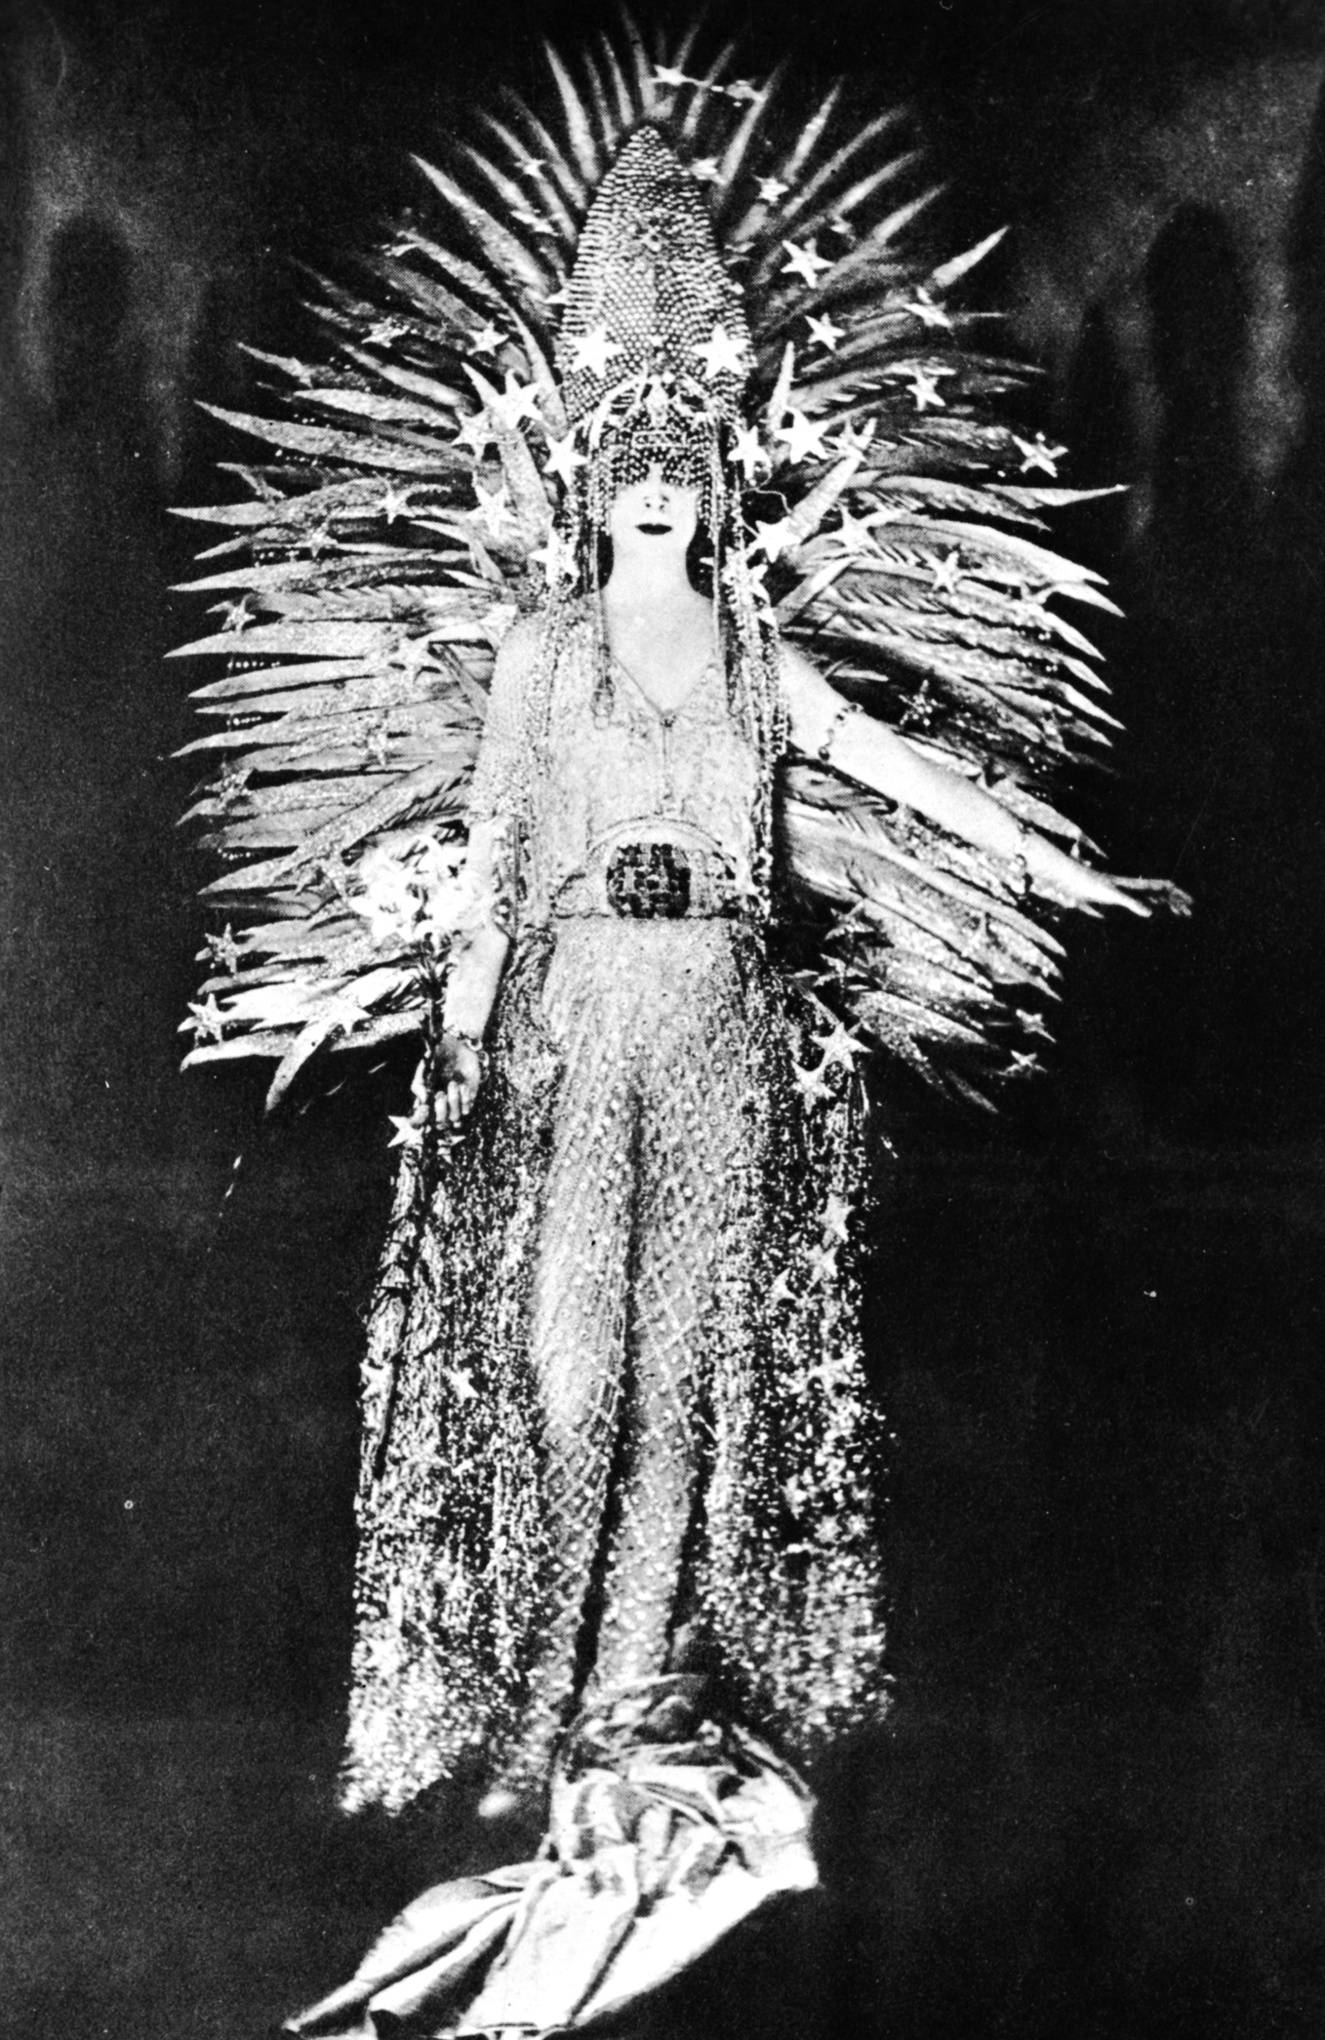 Marchesa Luisa Casati wearing a costume symbolising light to a fancy dress party in Paris, 1922. The costume, designed by Worth, is made of a net of diamonds, i